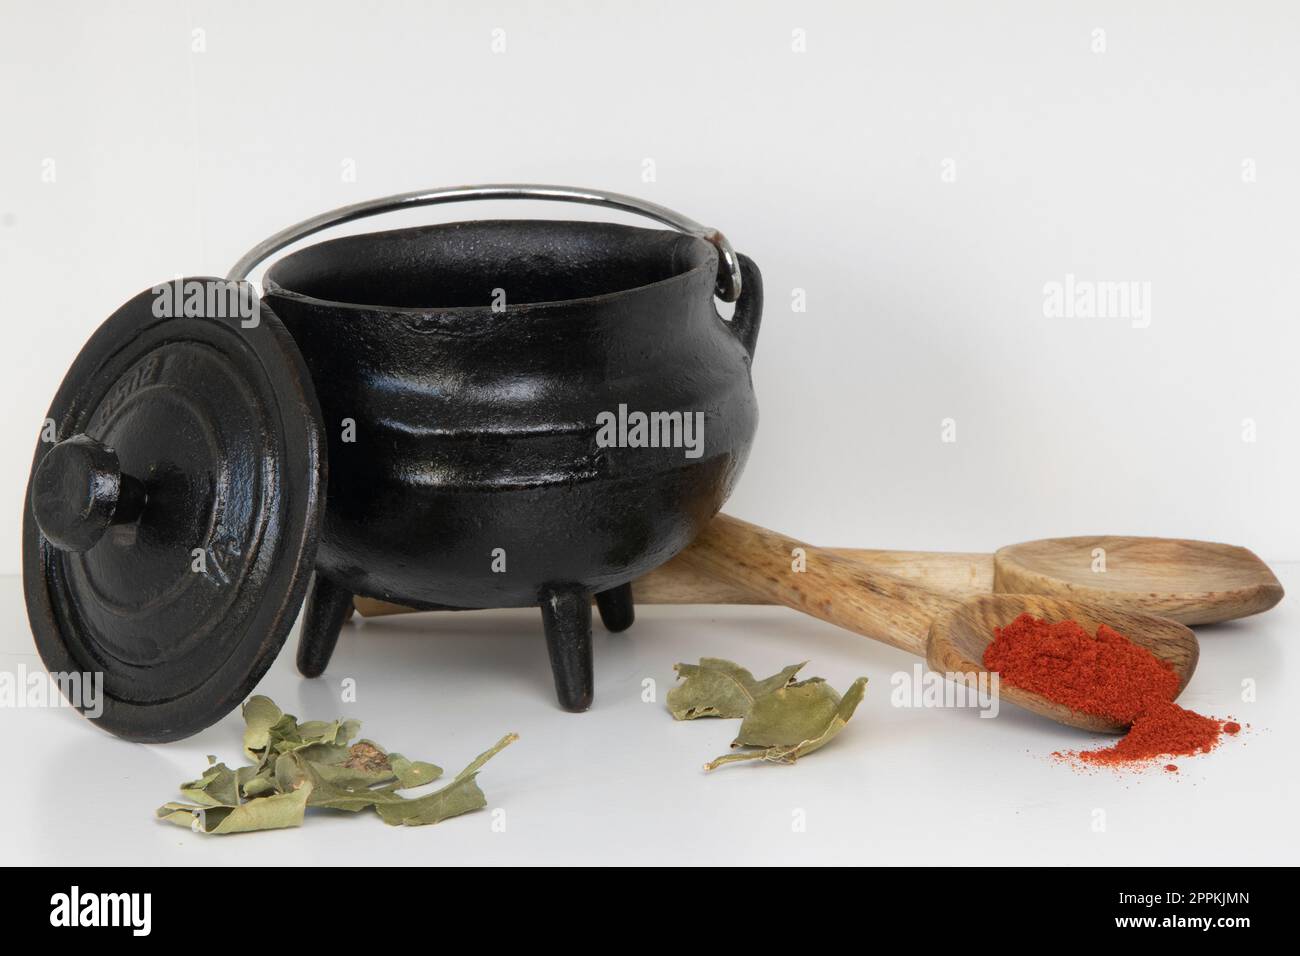 https://c8.alamy.com/comp/2PPKJMN/small-cast-iron-pot-with-wooden-spoon-and-spices-2PPKJMN.jpg